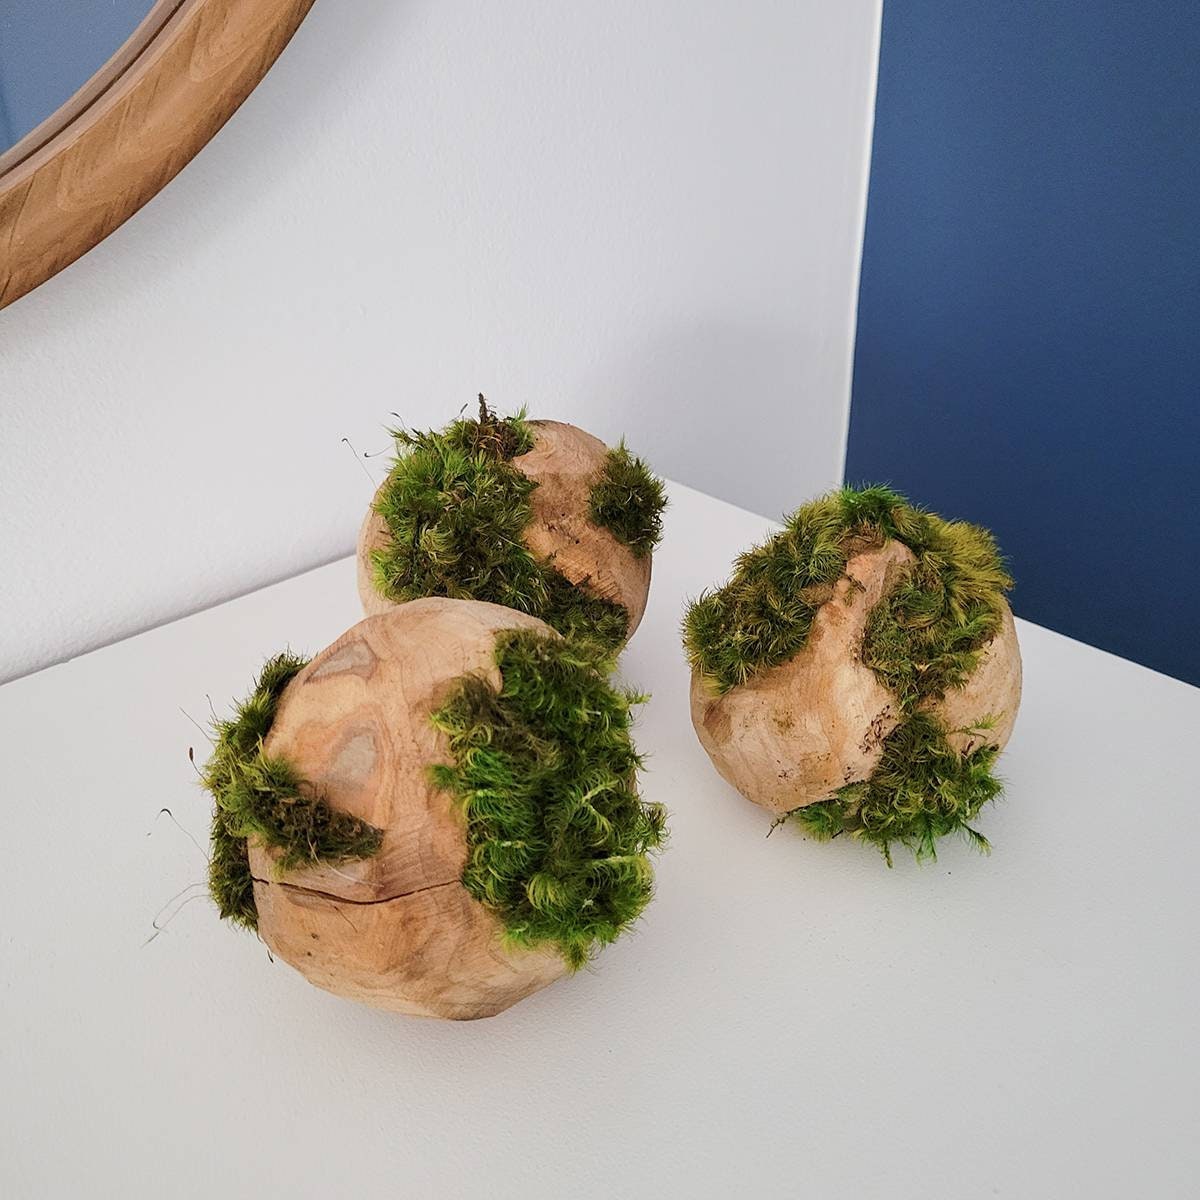 Wooden Moss Balls | Natural Wood Orb | Natural Decor | Moss Decor | Preserved Greenery | Nature Lover Gift for Her | Accent Decor